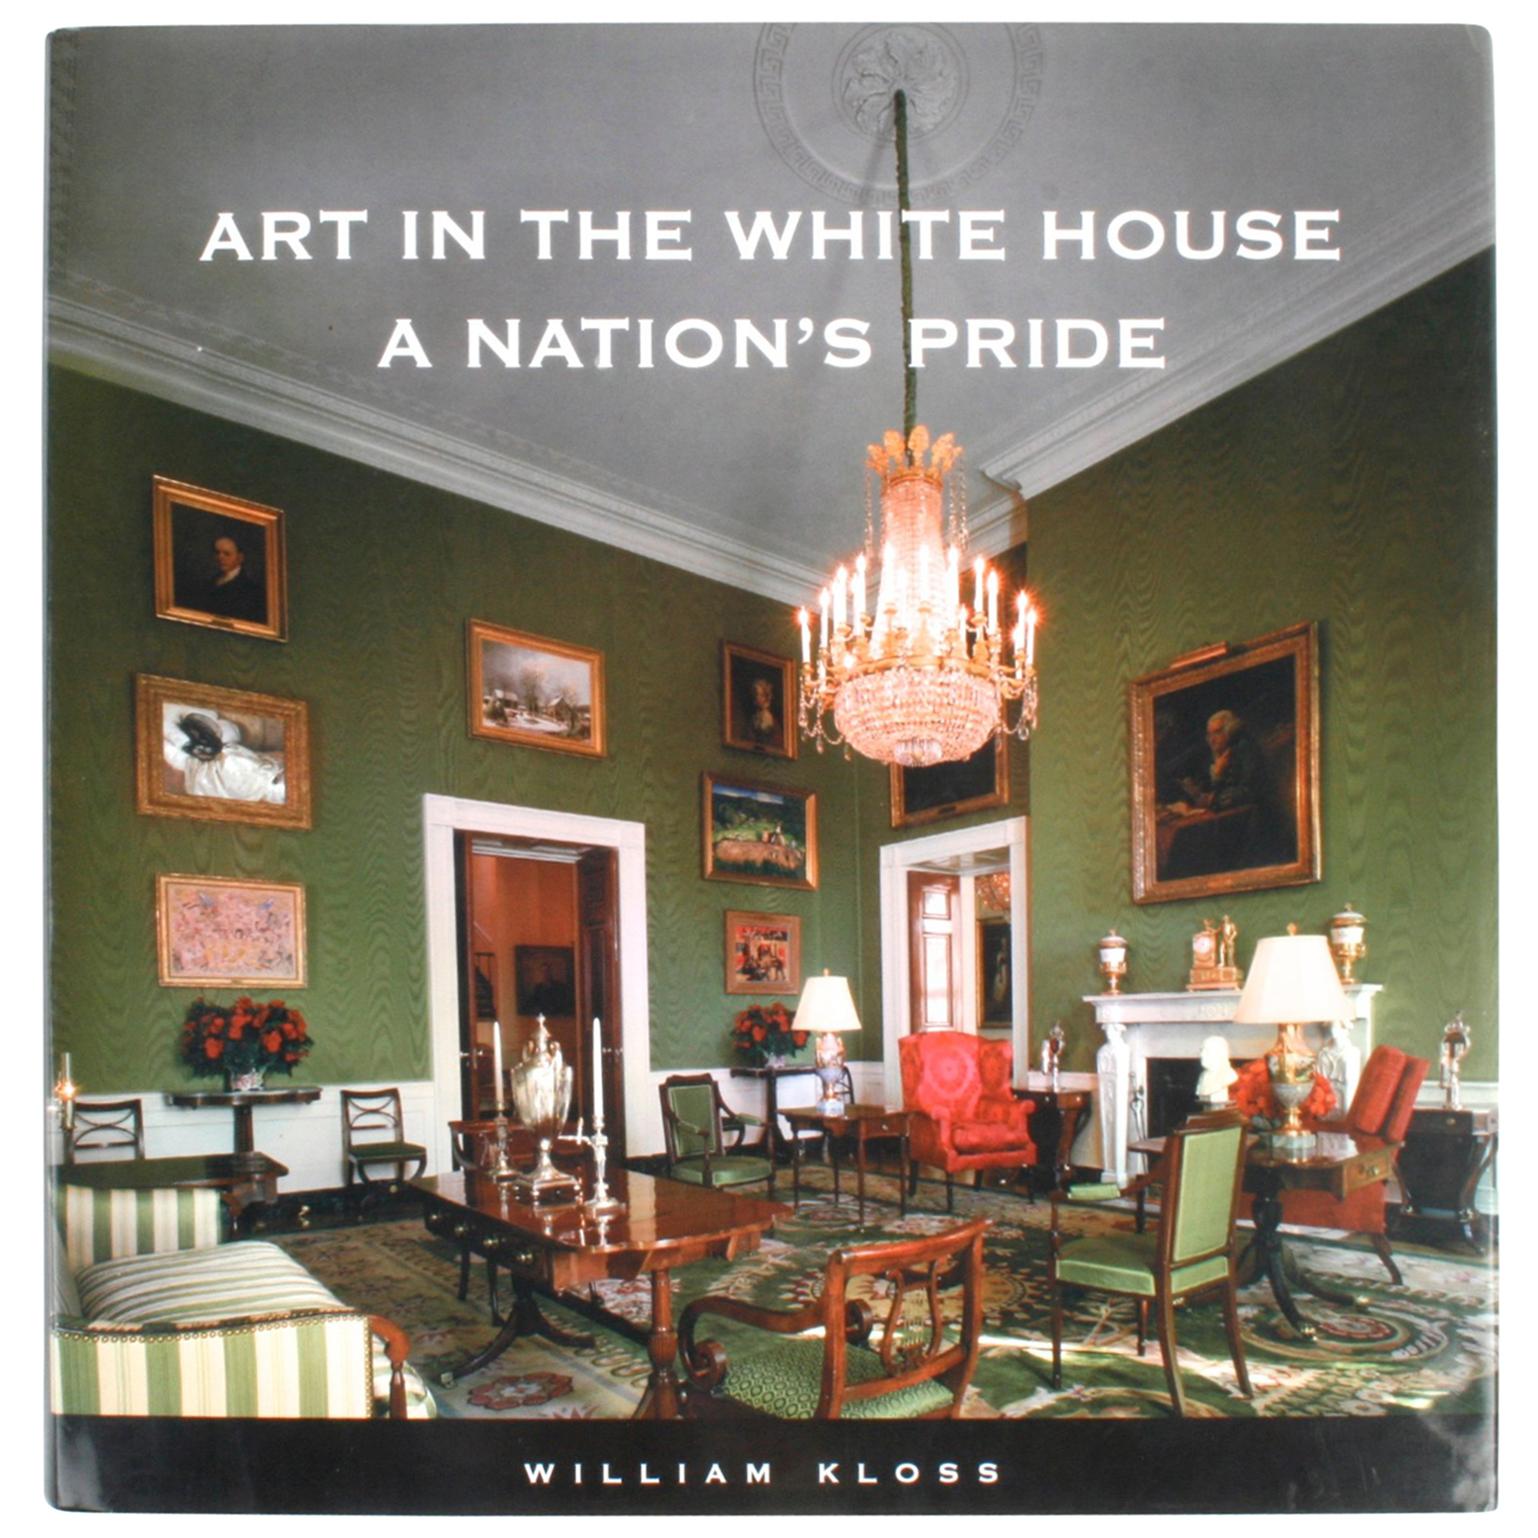 Art in the White House, A Nation's Pride by William Kloss